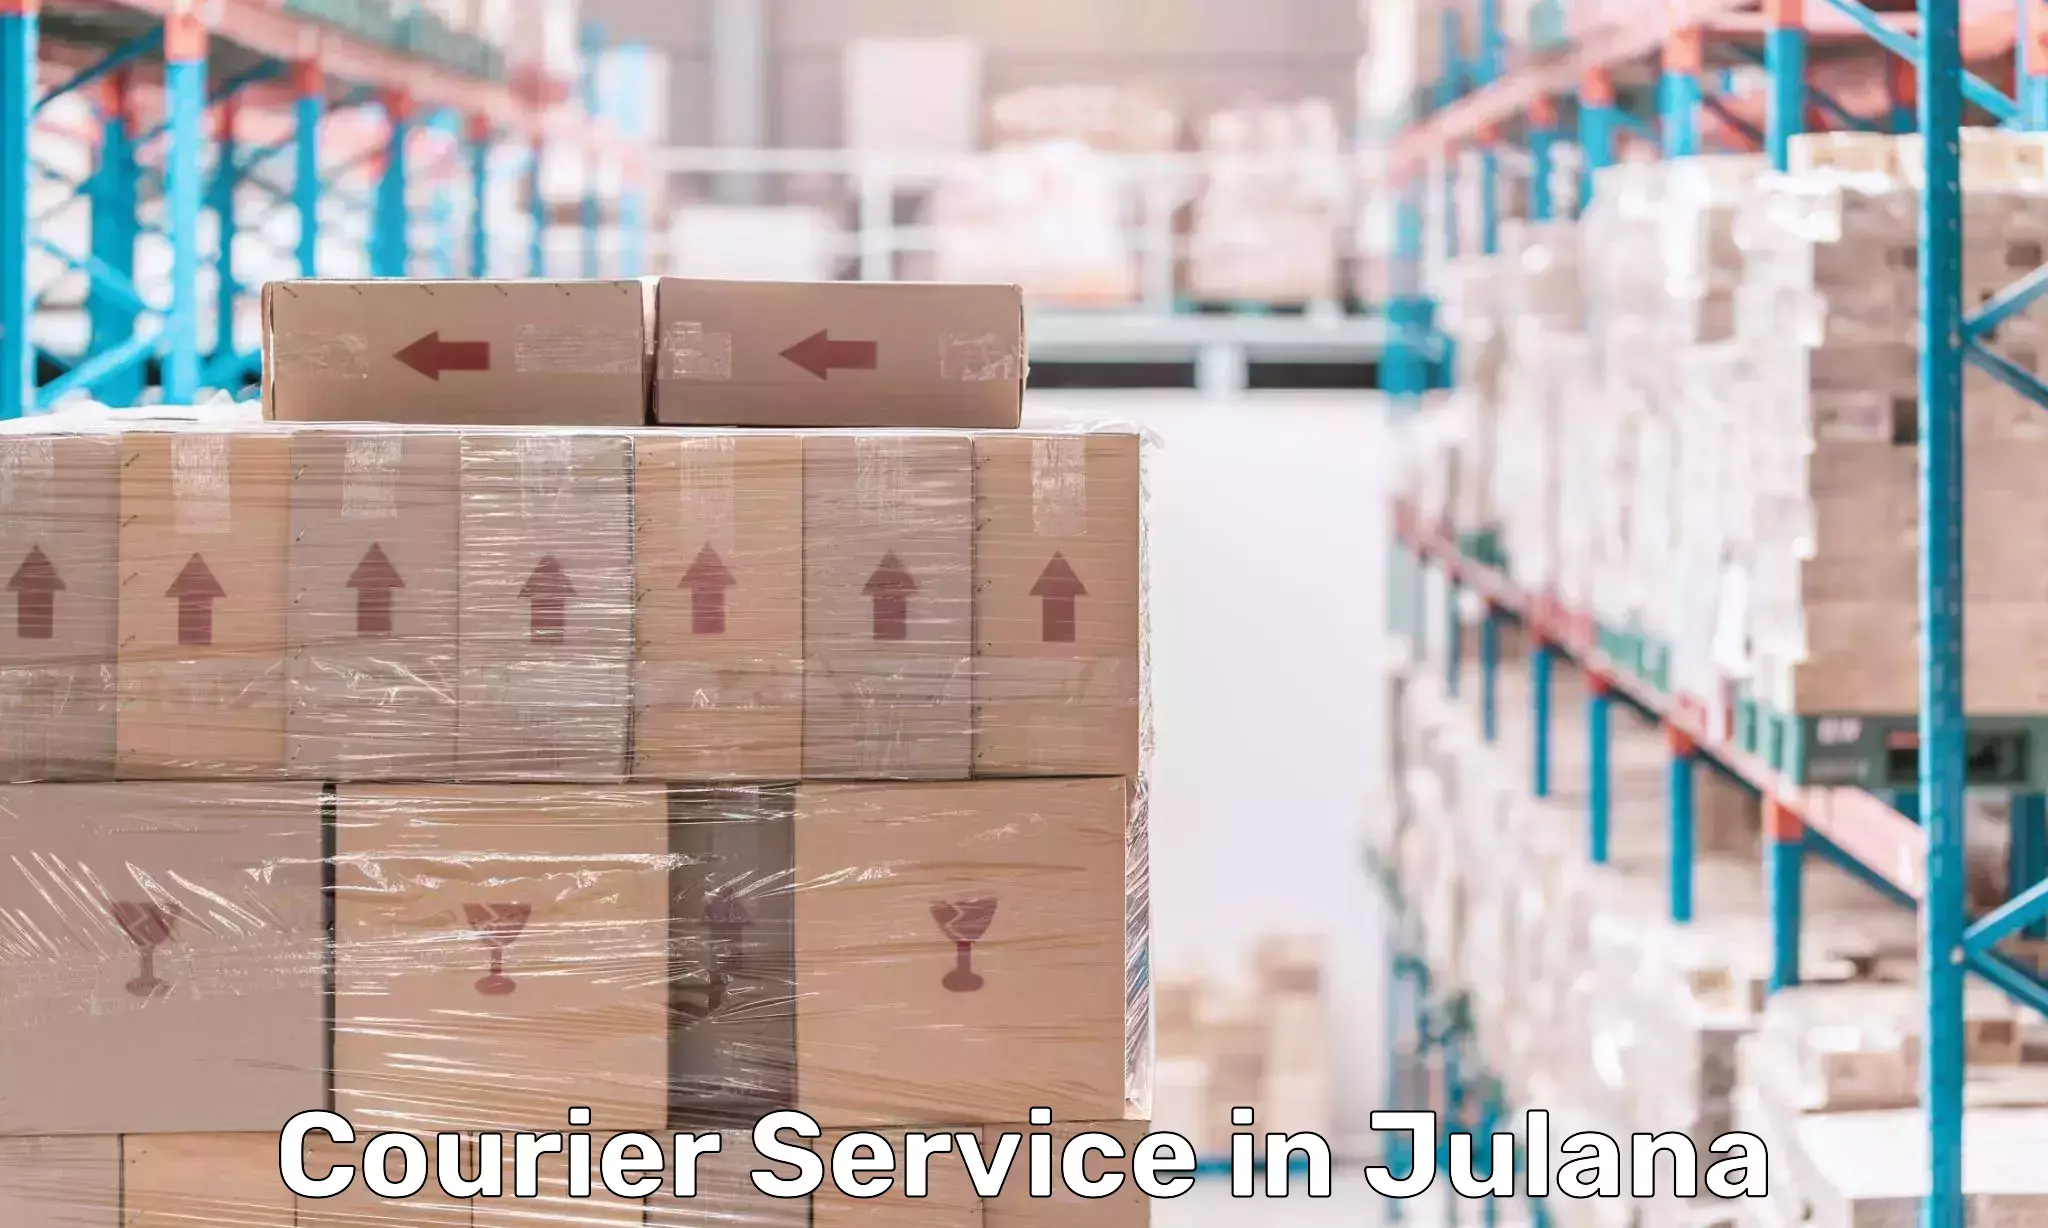 Online package tracking in Julana